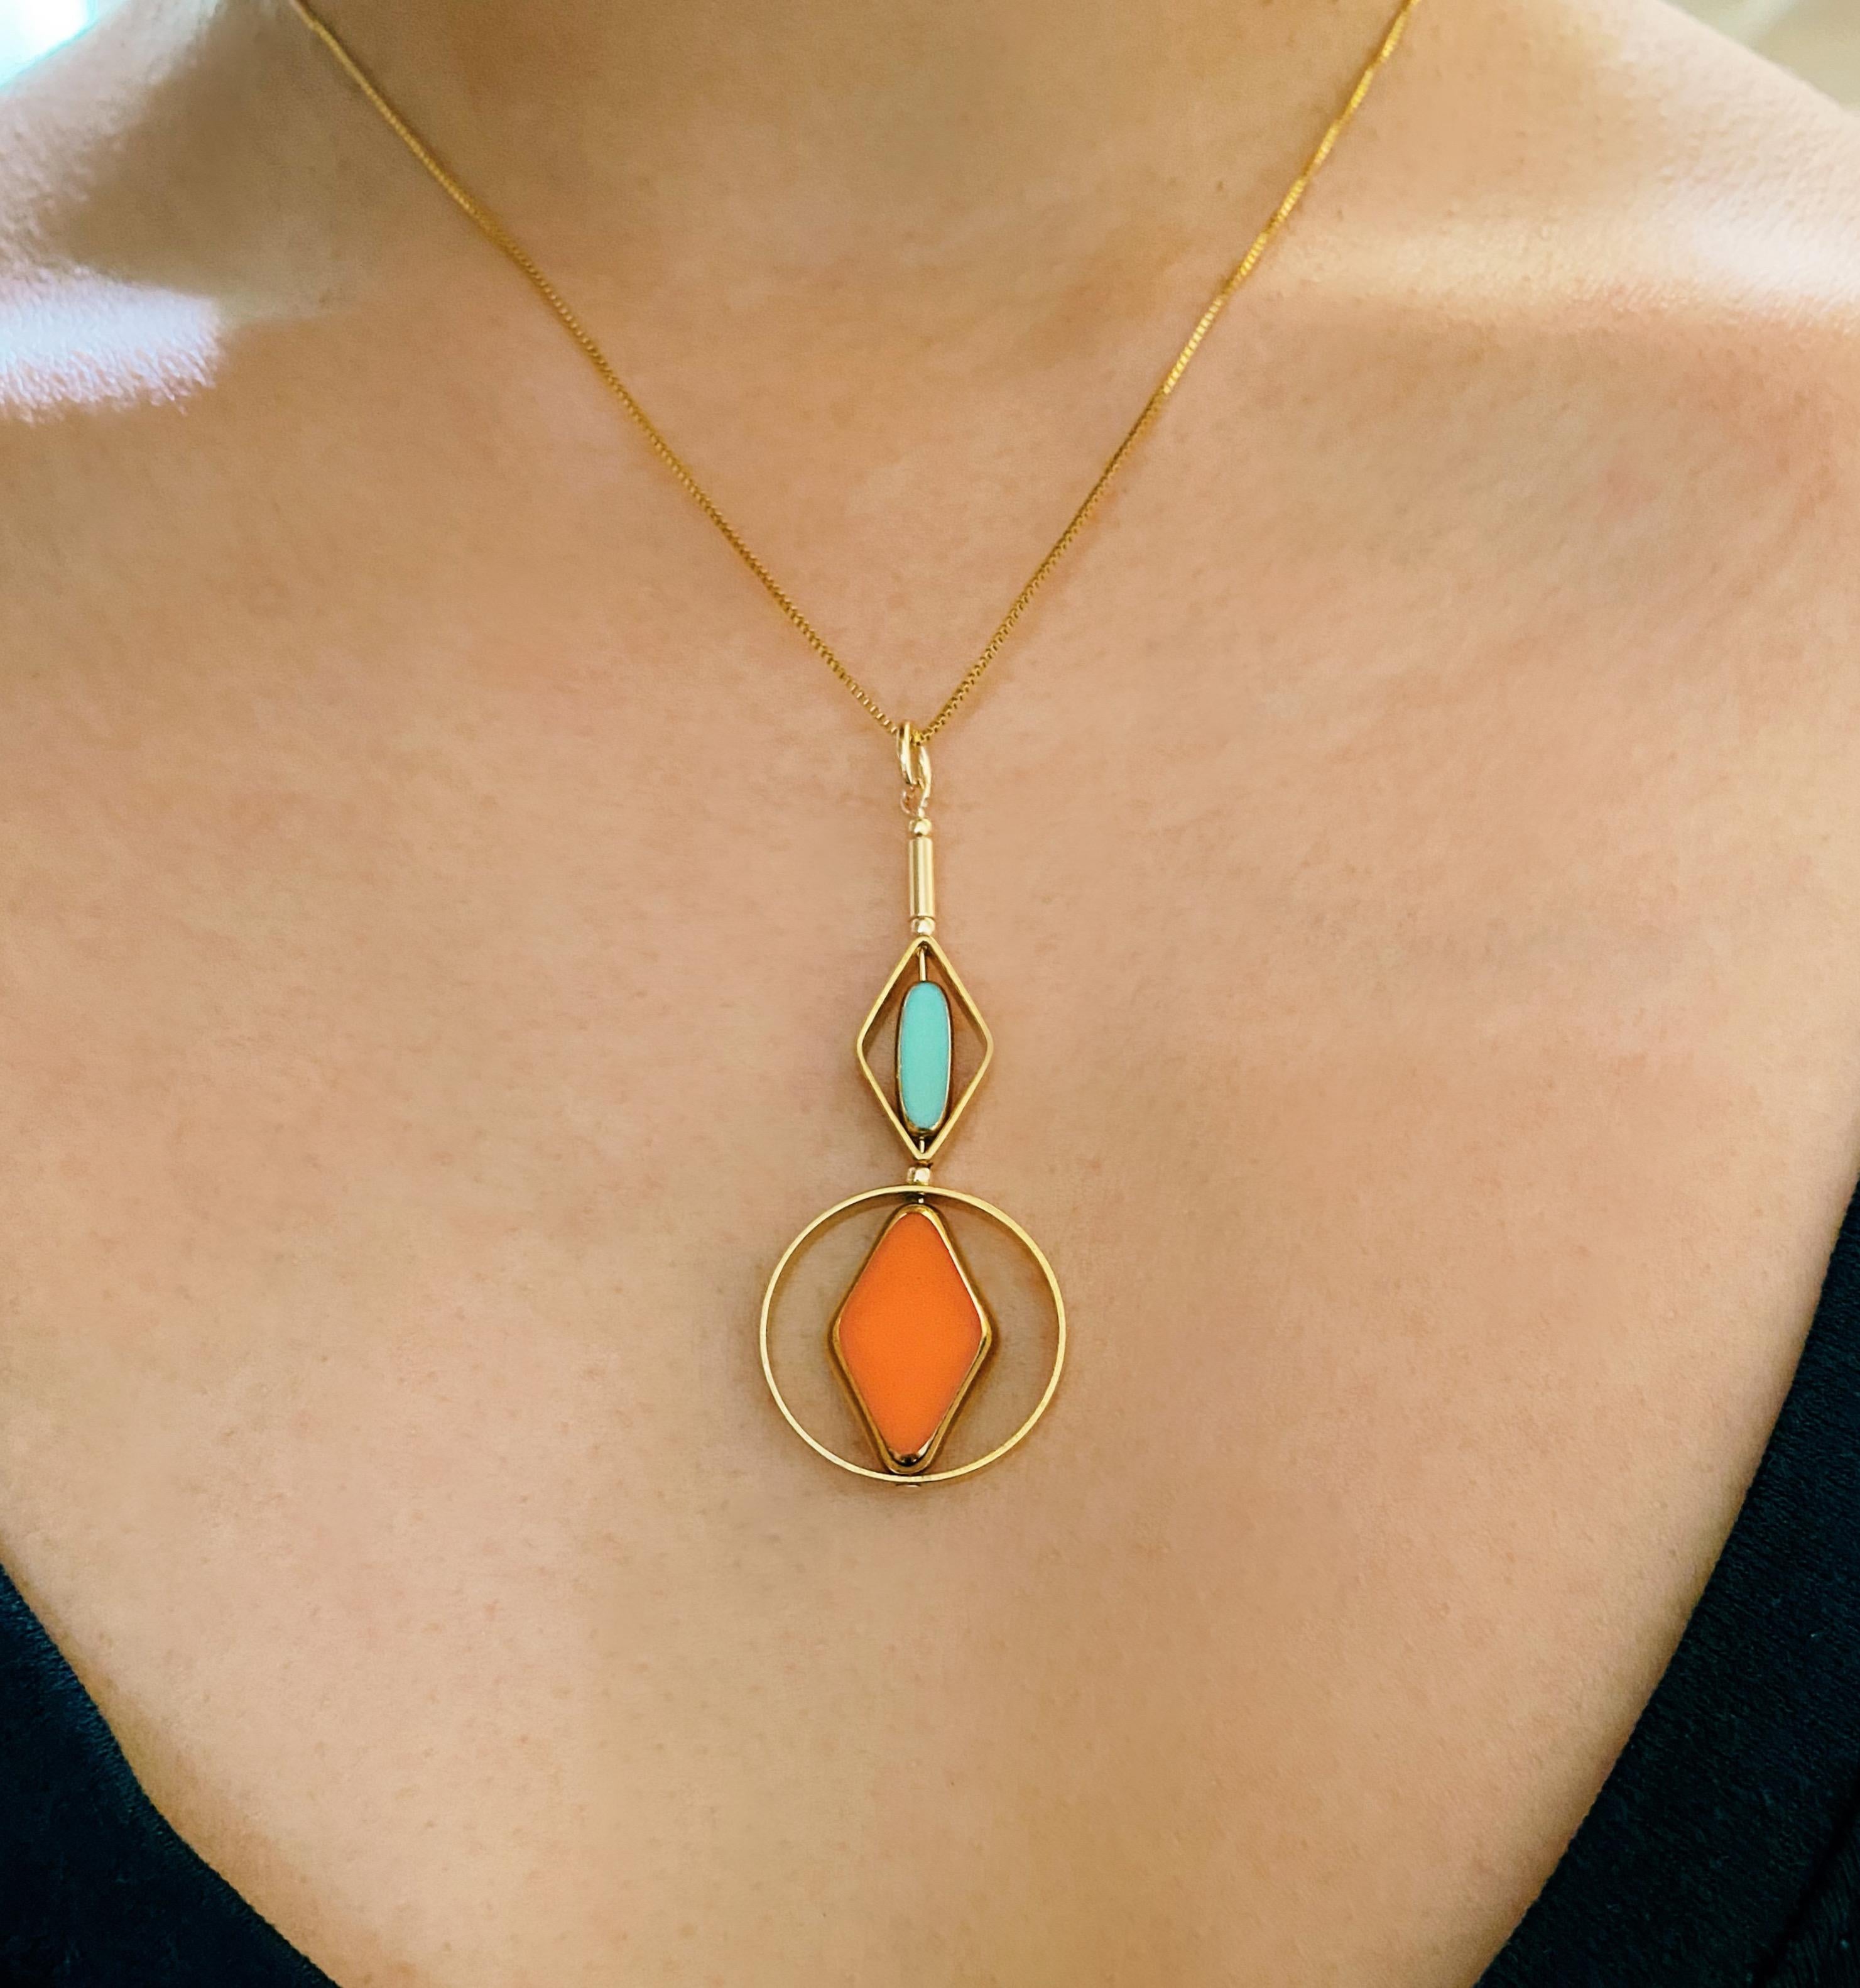 The pendant consist of an orange-red diamond and mini baby blue oblong shaped beads and finished with a 16 inch gold filled chain.

The beads are new old stock vintage German glass beads that are framed with 24K gold. The beads were hand pressed